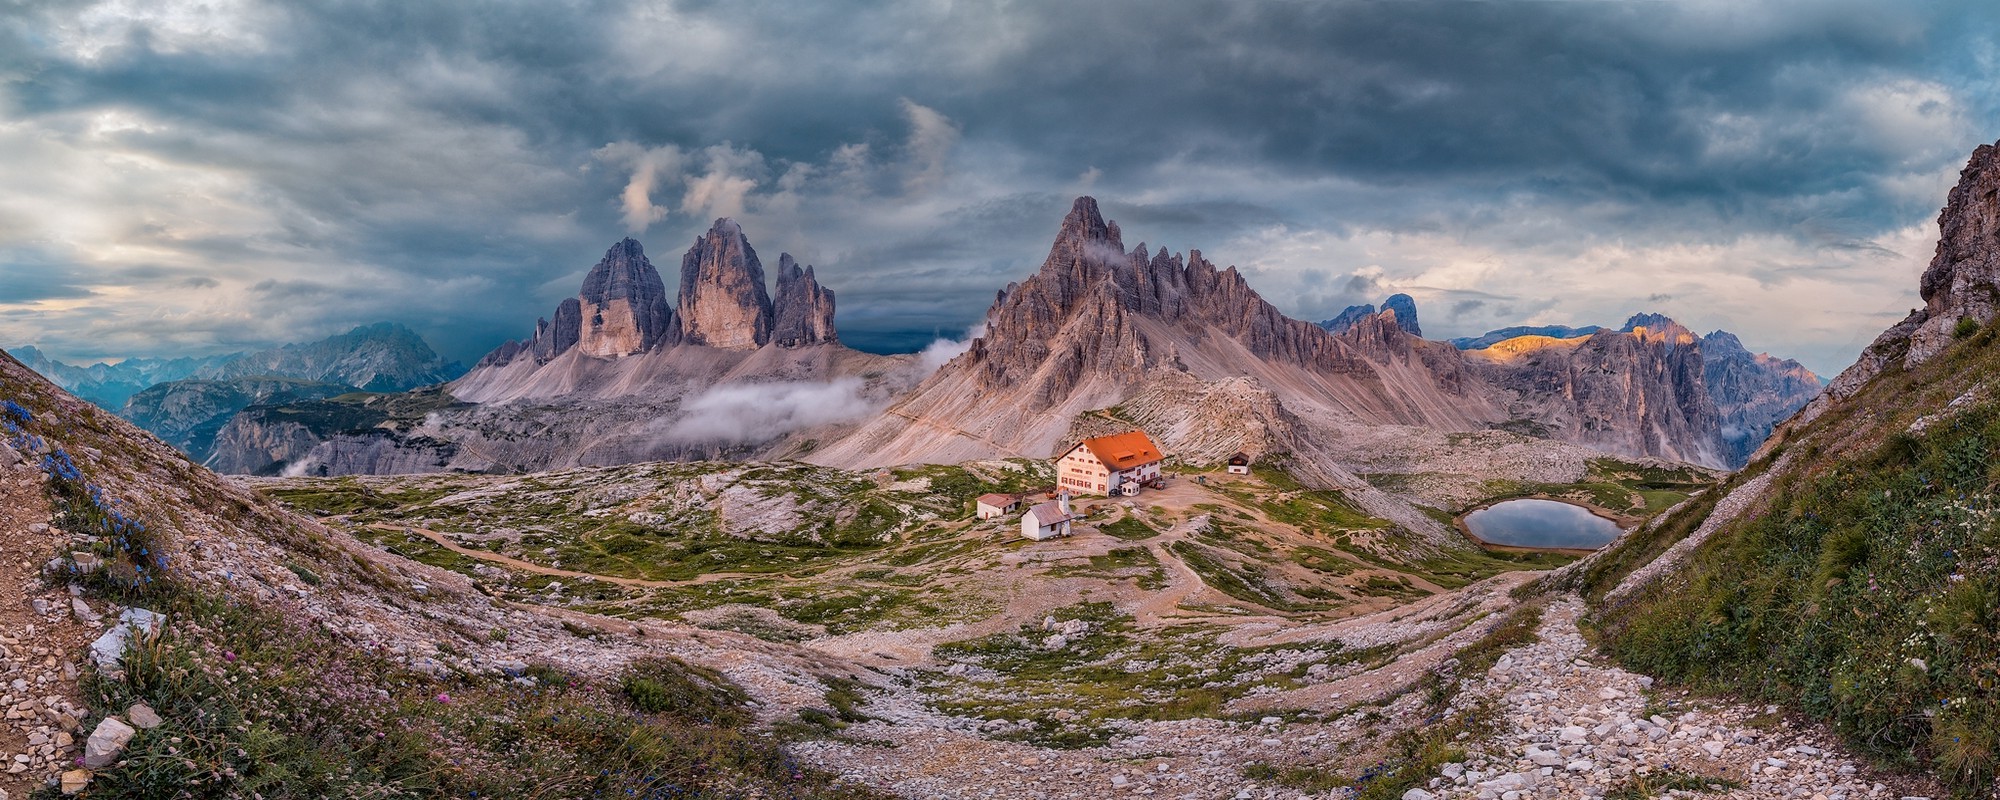 nature, Landscape, Panoramas, Mountain, Lake, Wildflowers, Alps, Italy, Clouds, Summer, Hotels, Cabin Wallpaper